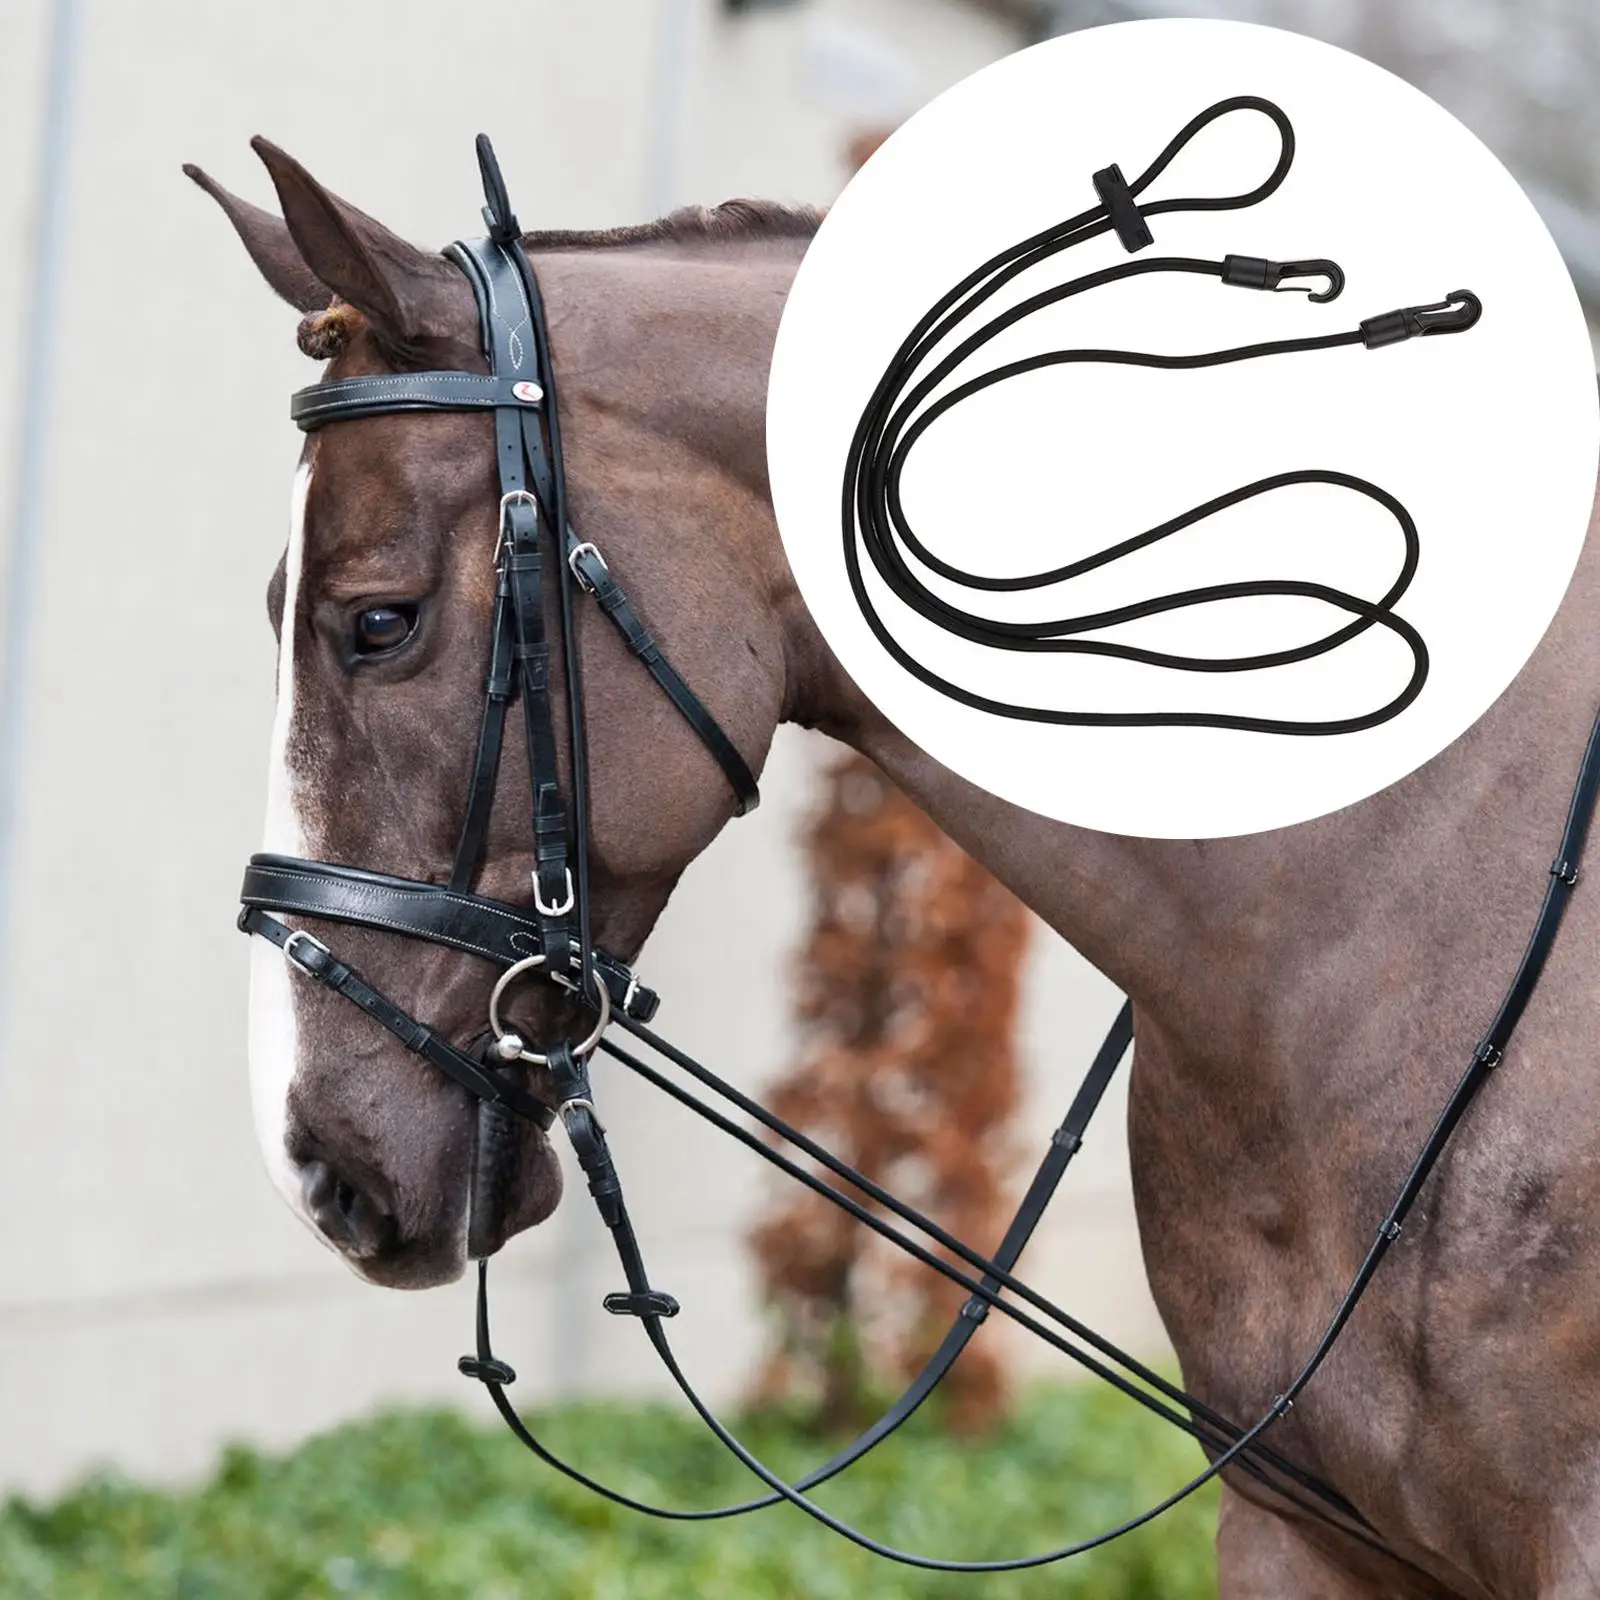 Horse Auxiliary Reins Neck Stretcher Training Rope for Outdoor Sports Riding